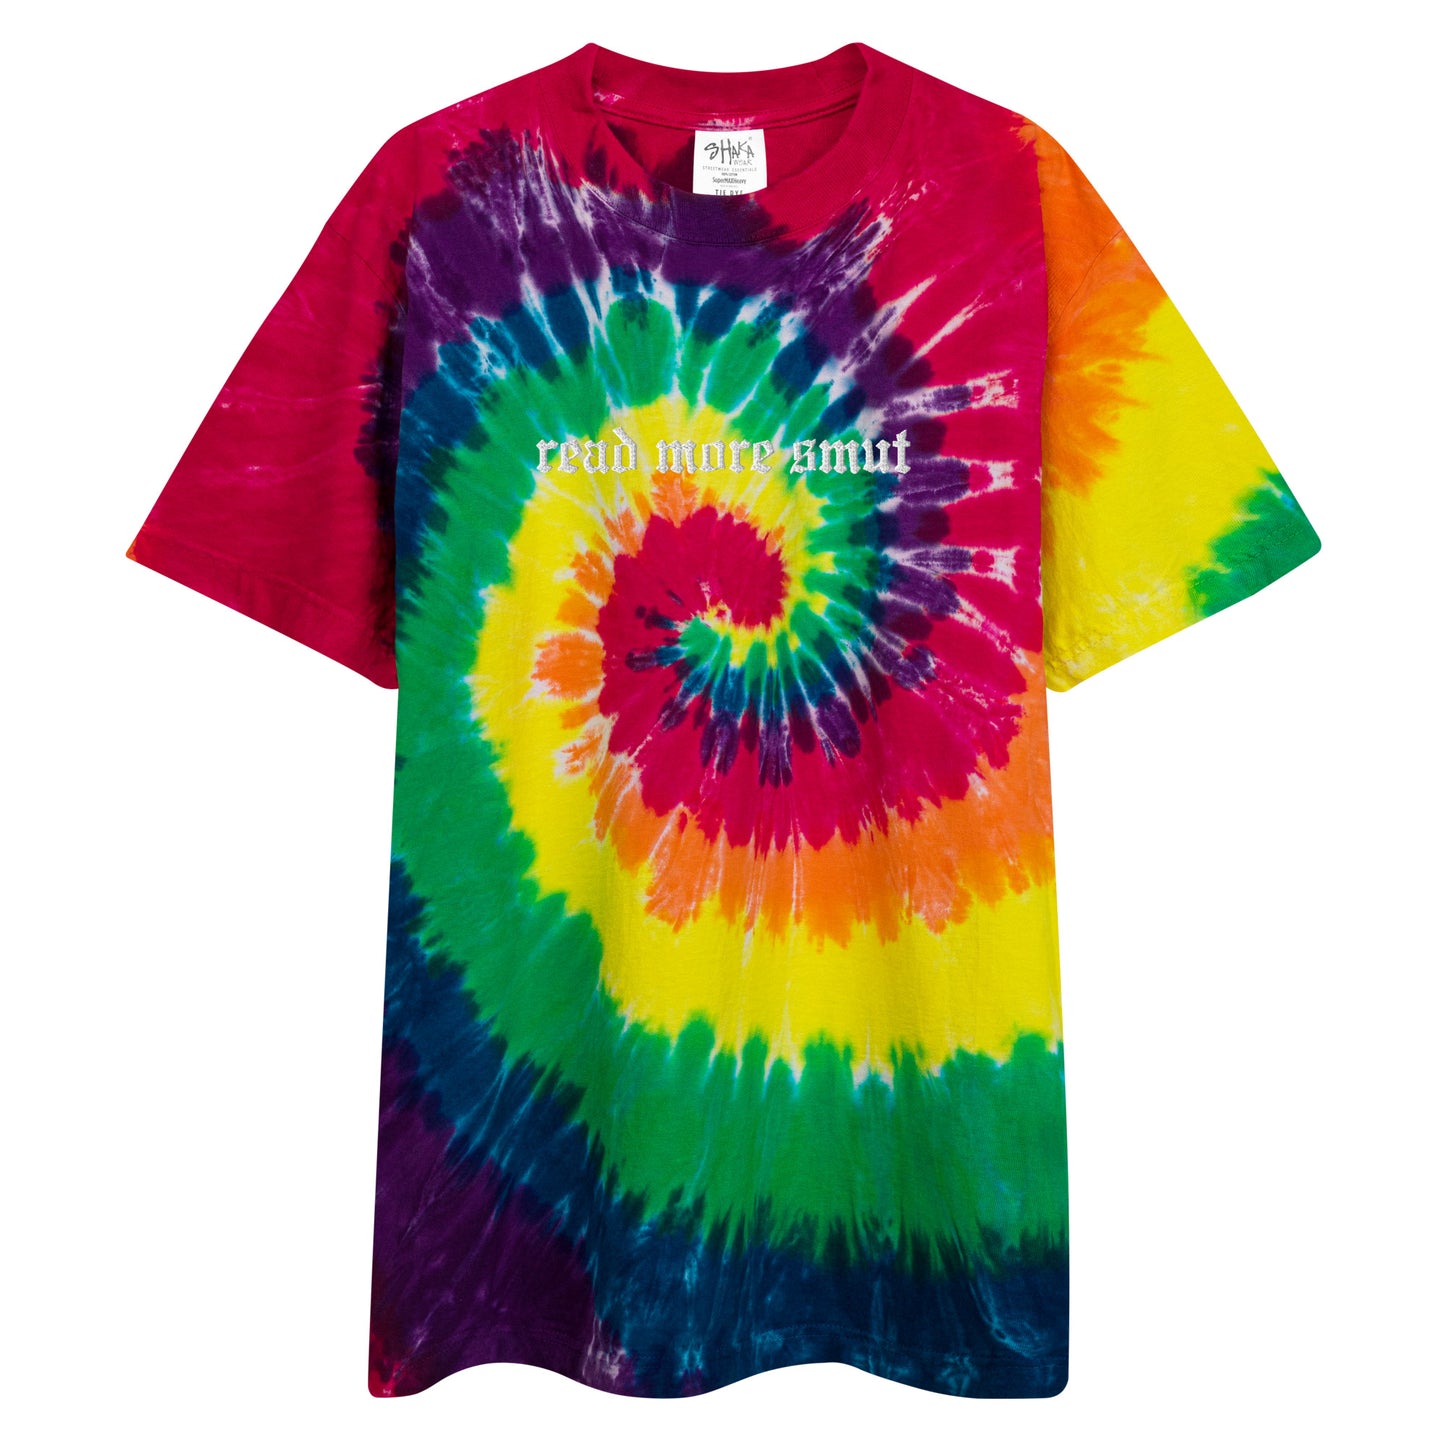 read more smut embroidered tie-dye t-shirt